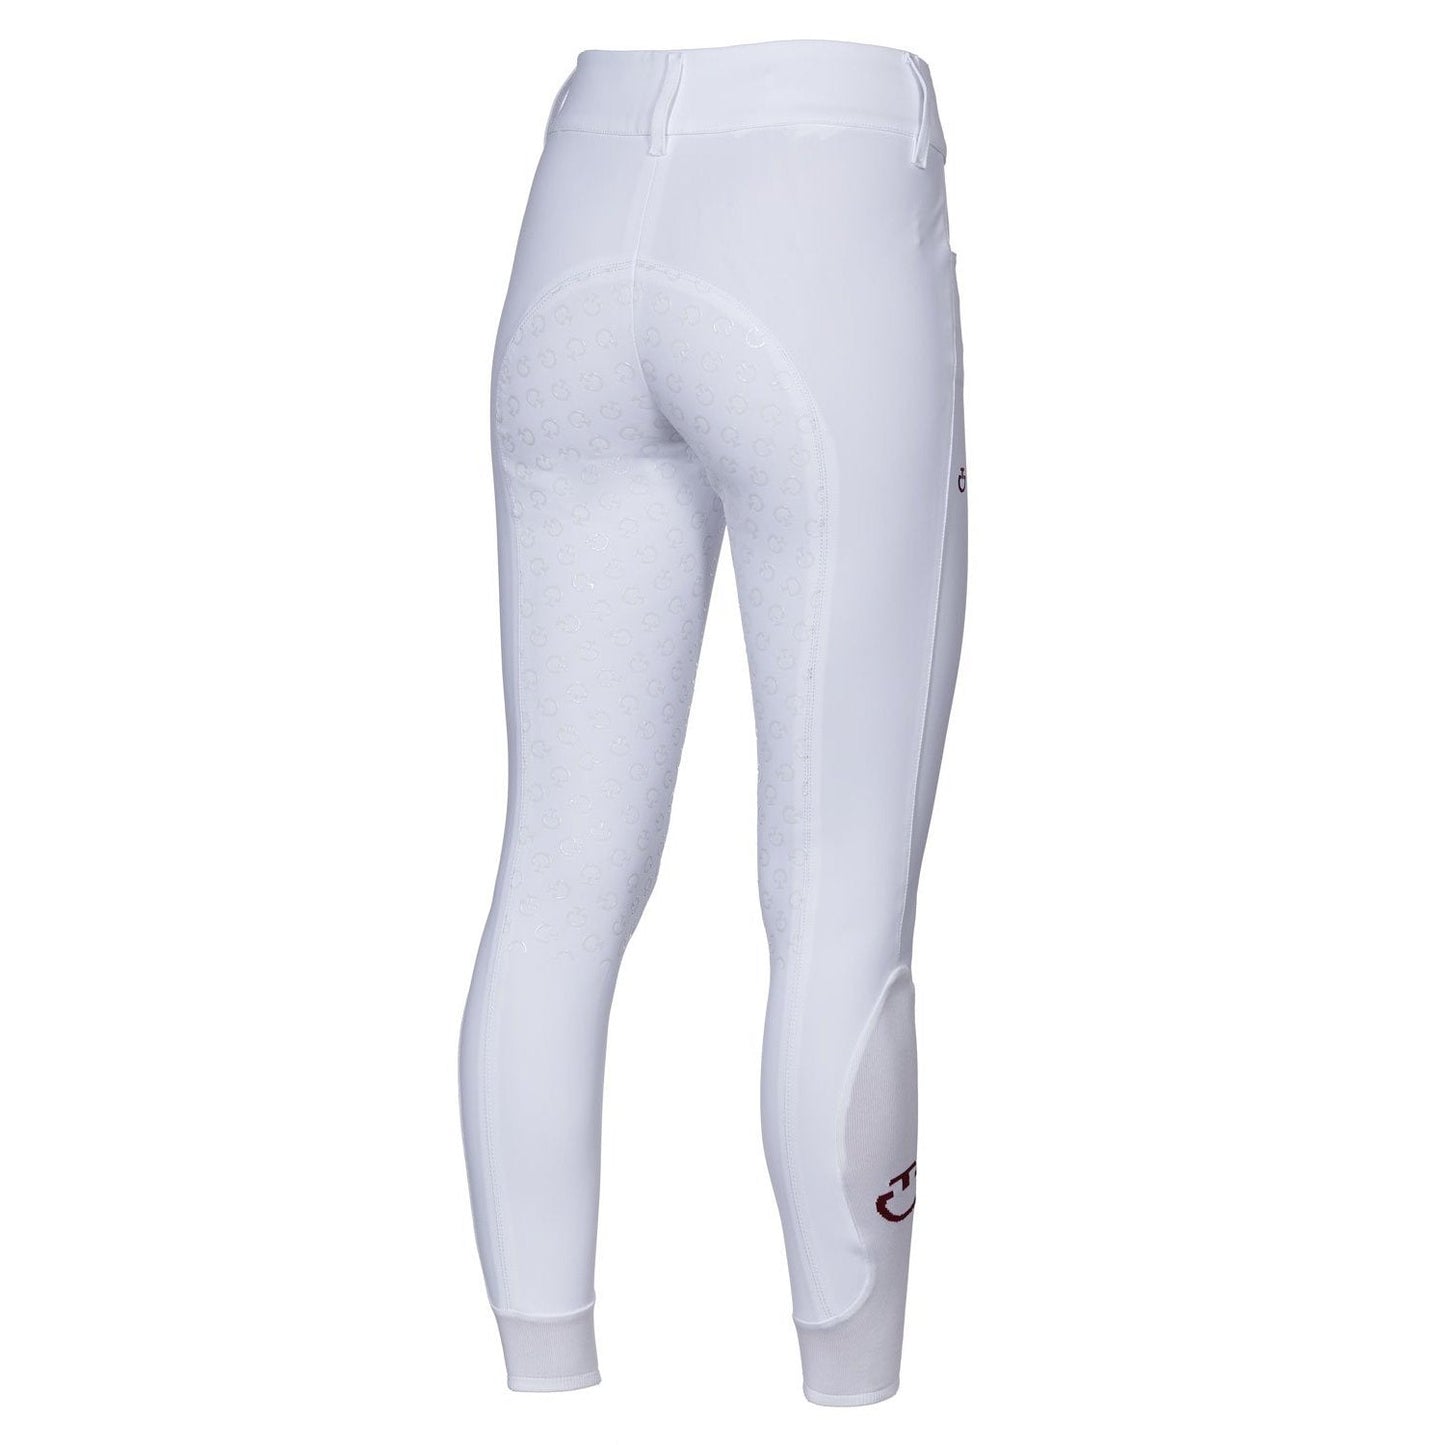 Cavalleria Toscana American Full Grip Breeches-Trailrace Equestrian Outfitters-The Equestrian